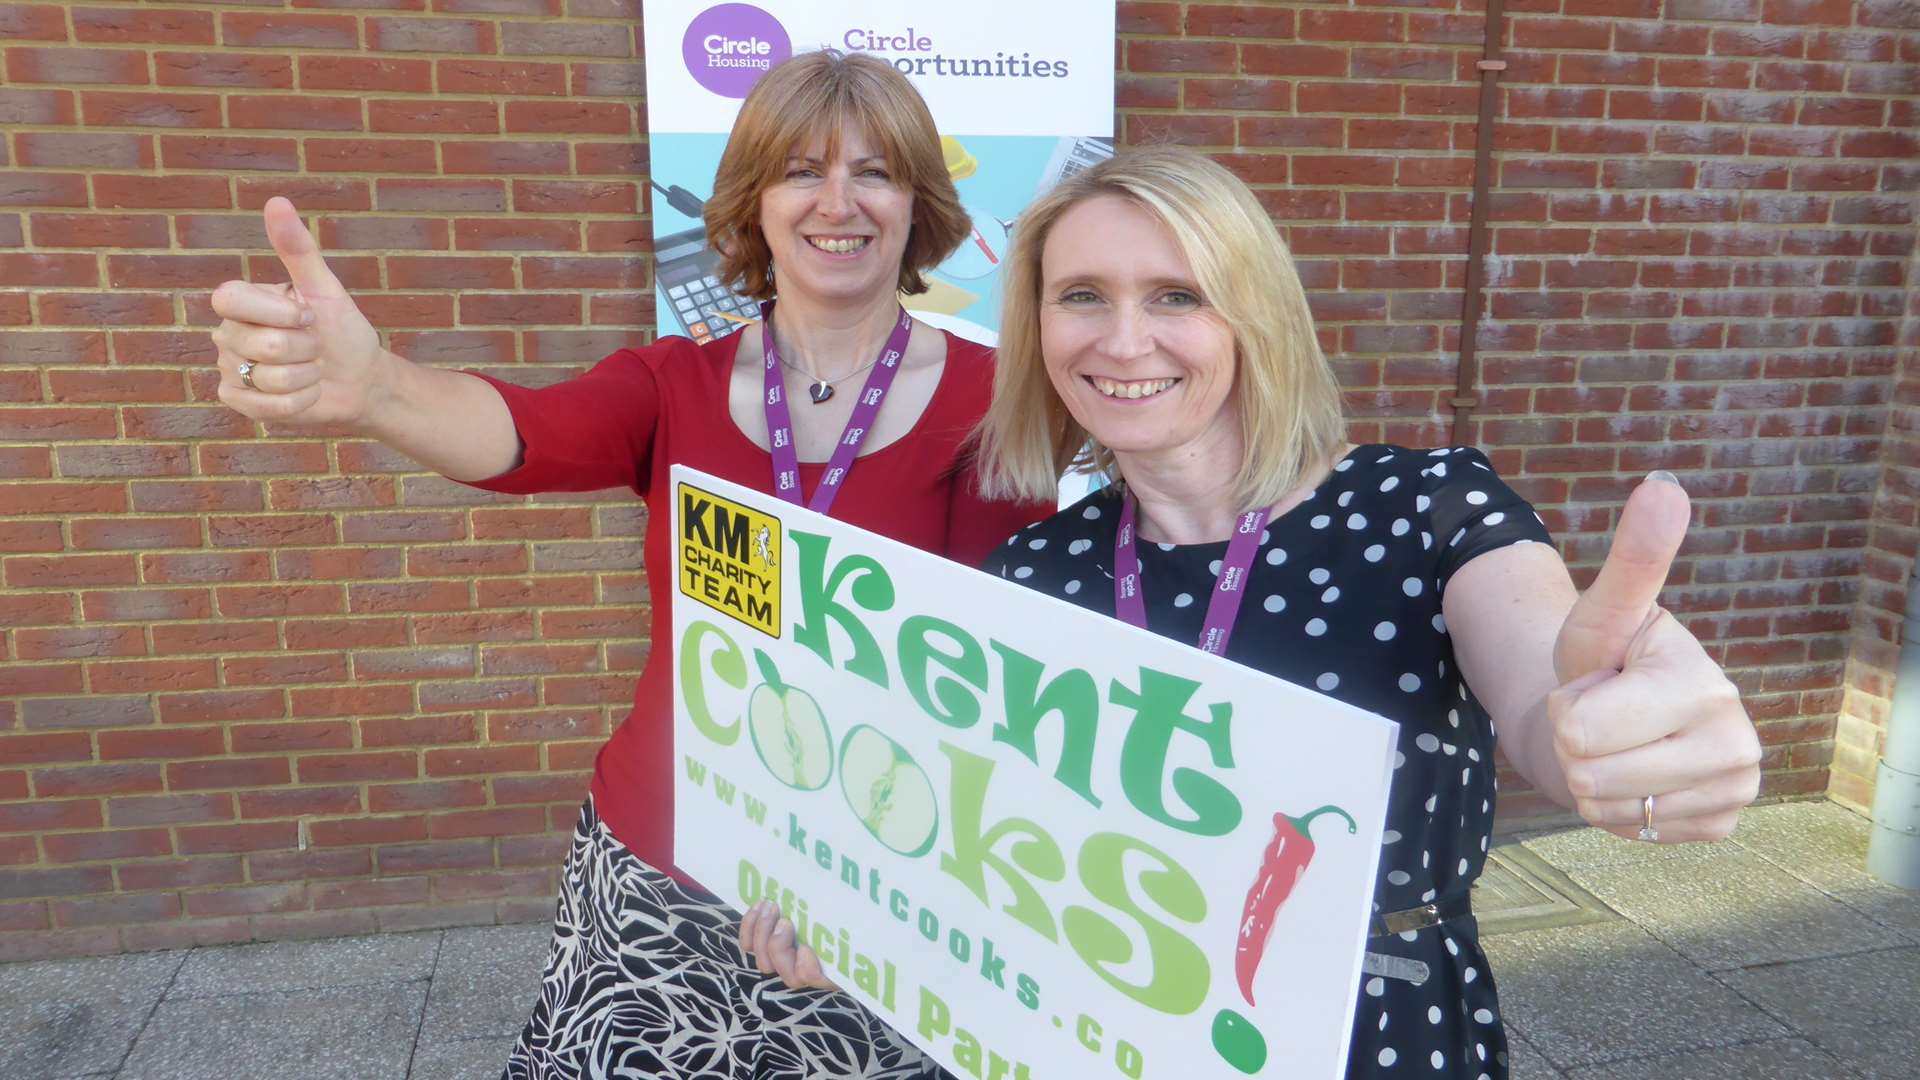 Gail Devries and Anita Cleugh of Circle Housing Russet announce support for KM Kent Cooks 2015.